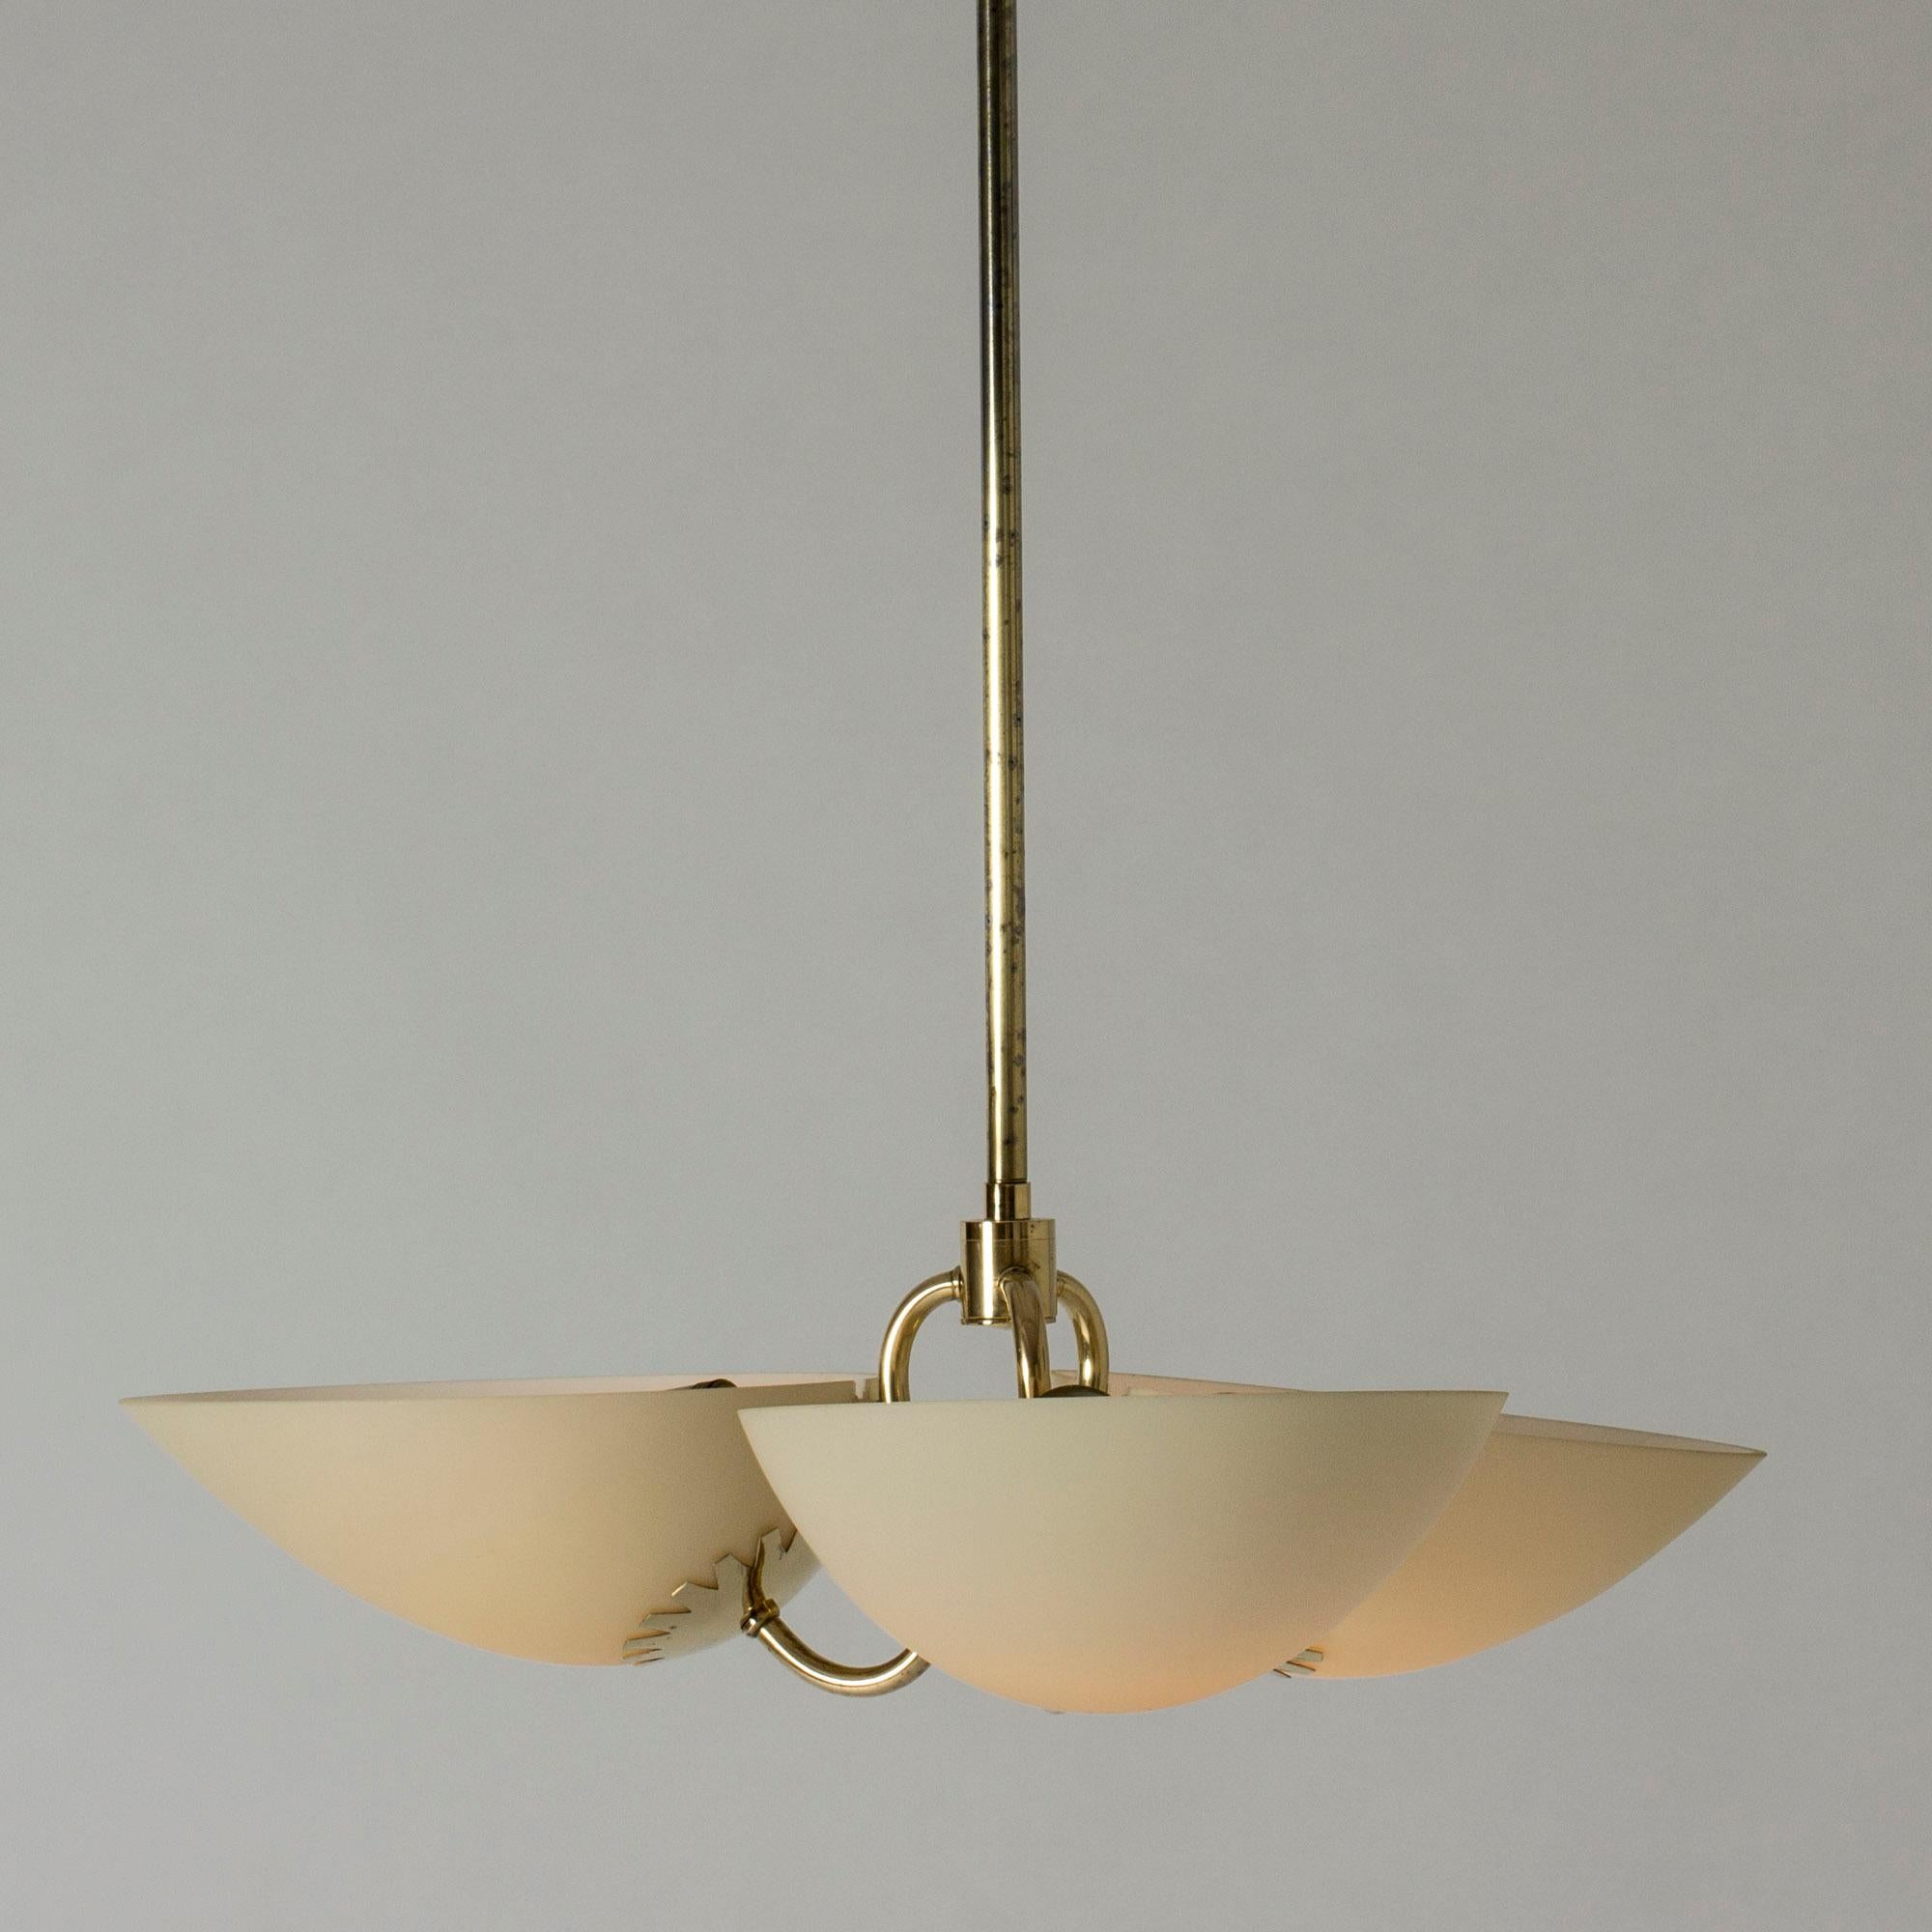 Beautiful brass and glass chandelier from the Swedish Modern period. Clean lines and elegant decorative details. The three shades are made from white, almost opaque glass that have the look of thin marble when lit.